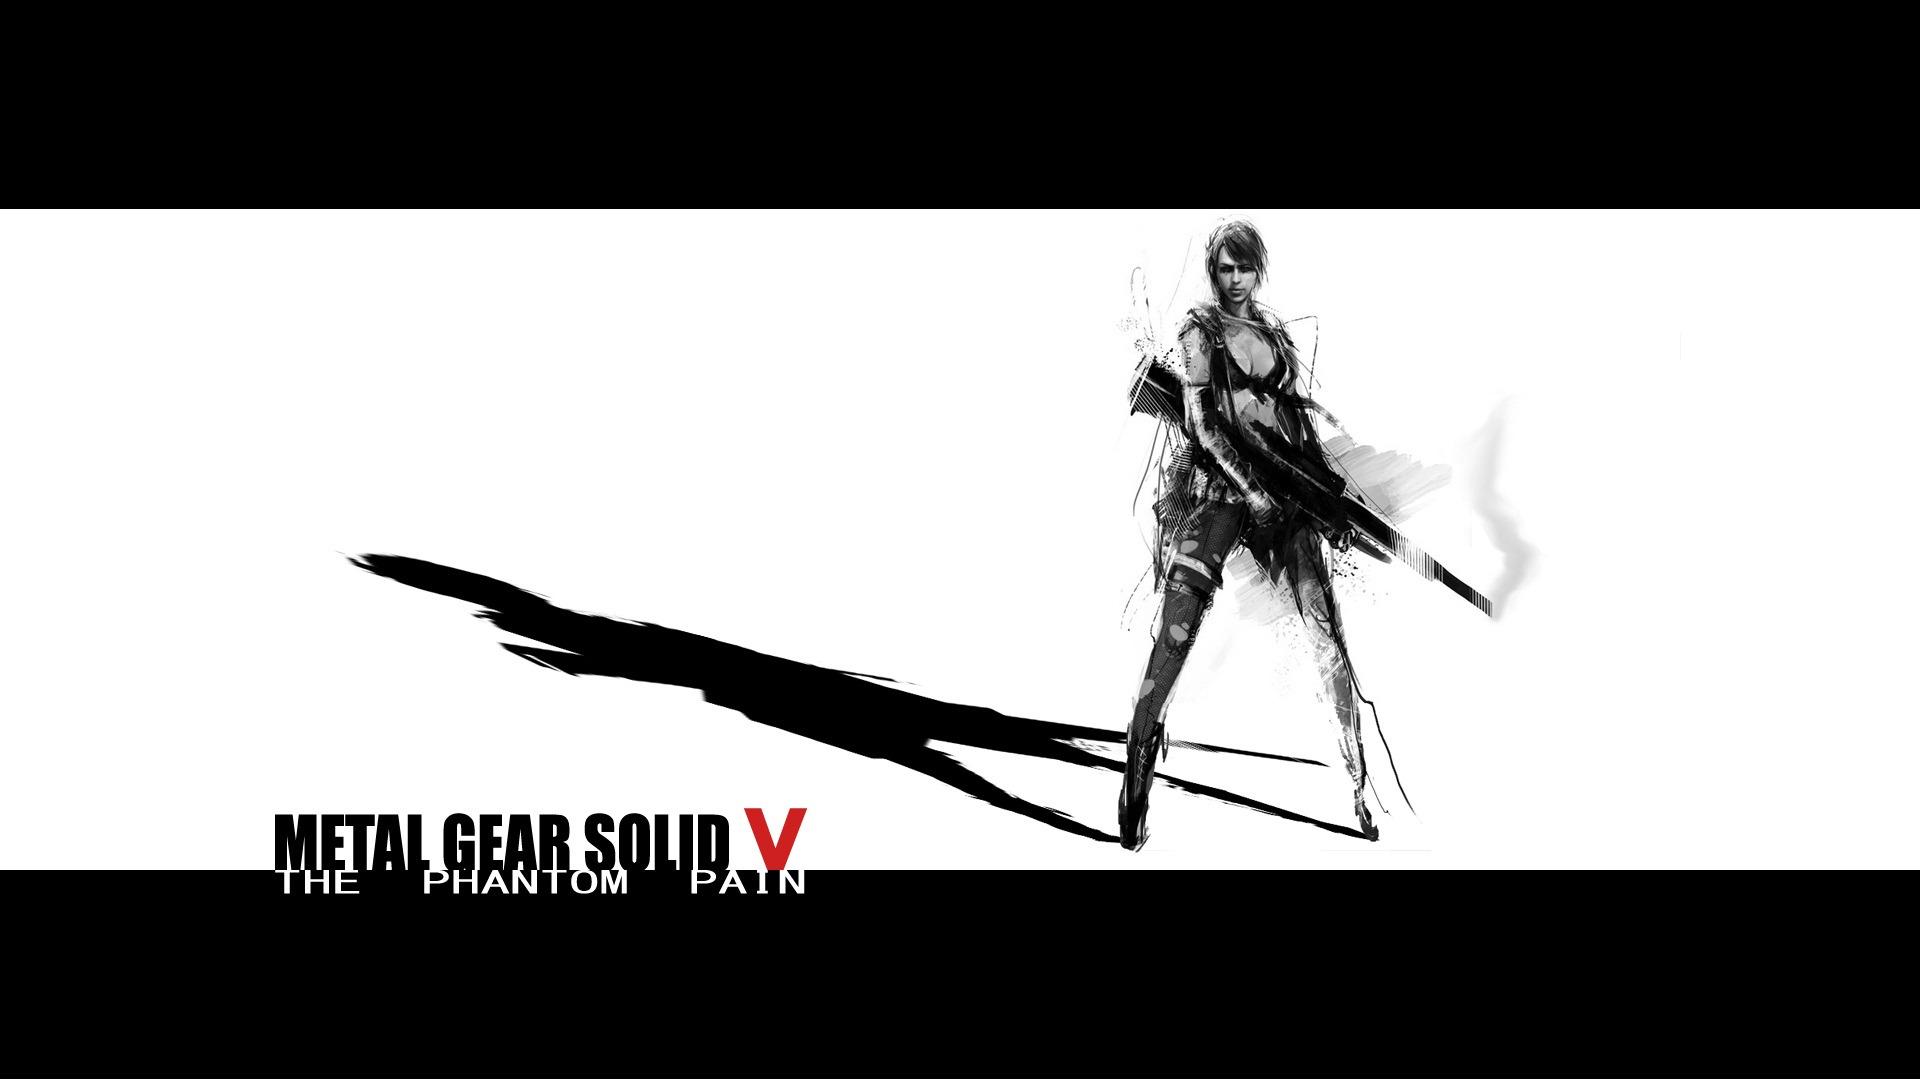 Metal Gear Solid V: The Phantom Pain, Video Games, Kojima Productions, Quiet, Simple, Video Game Girls Wallpaper